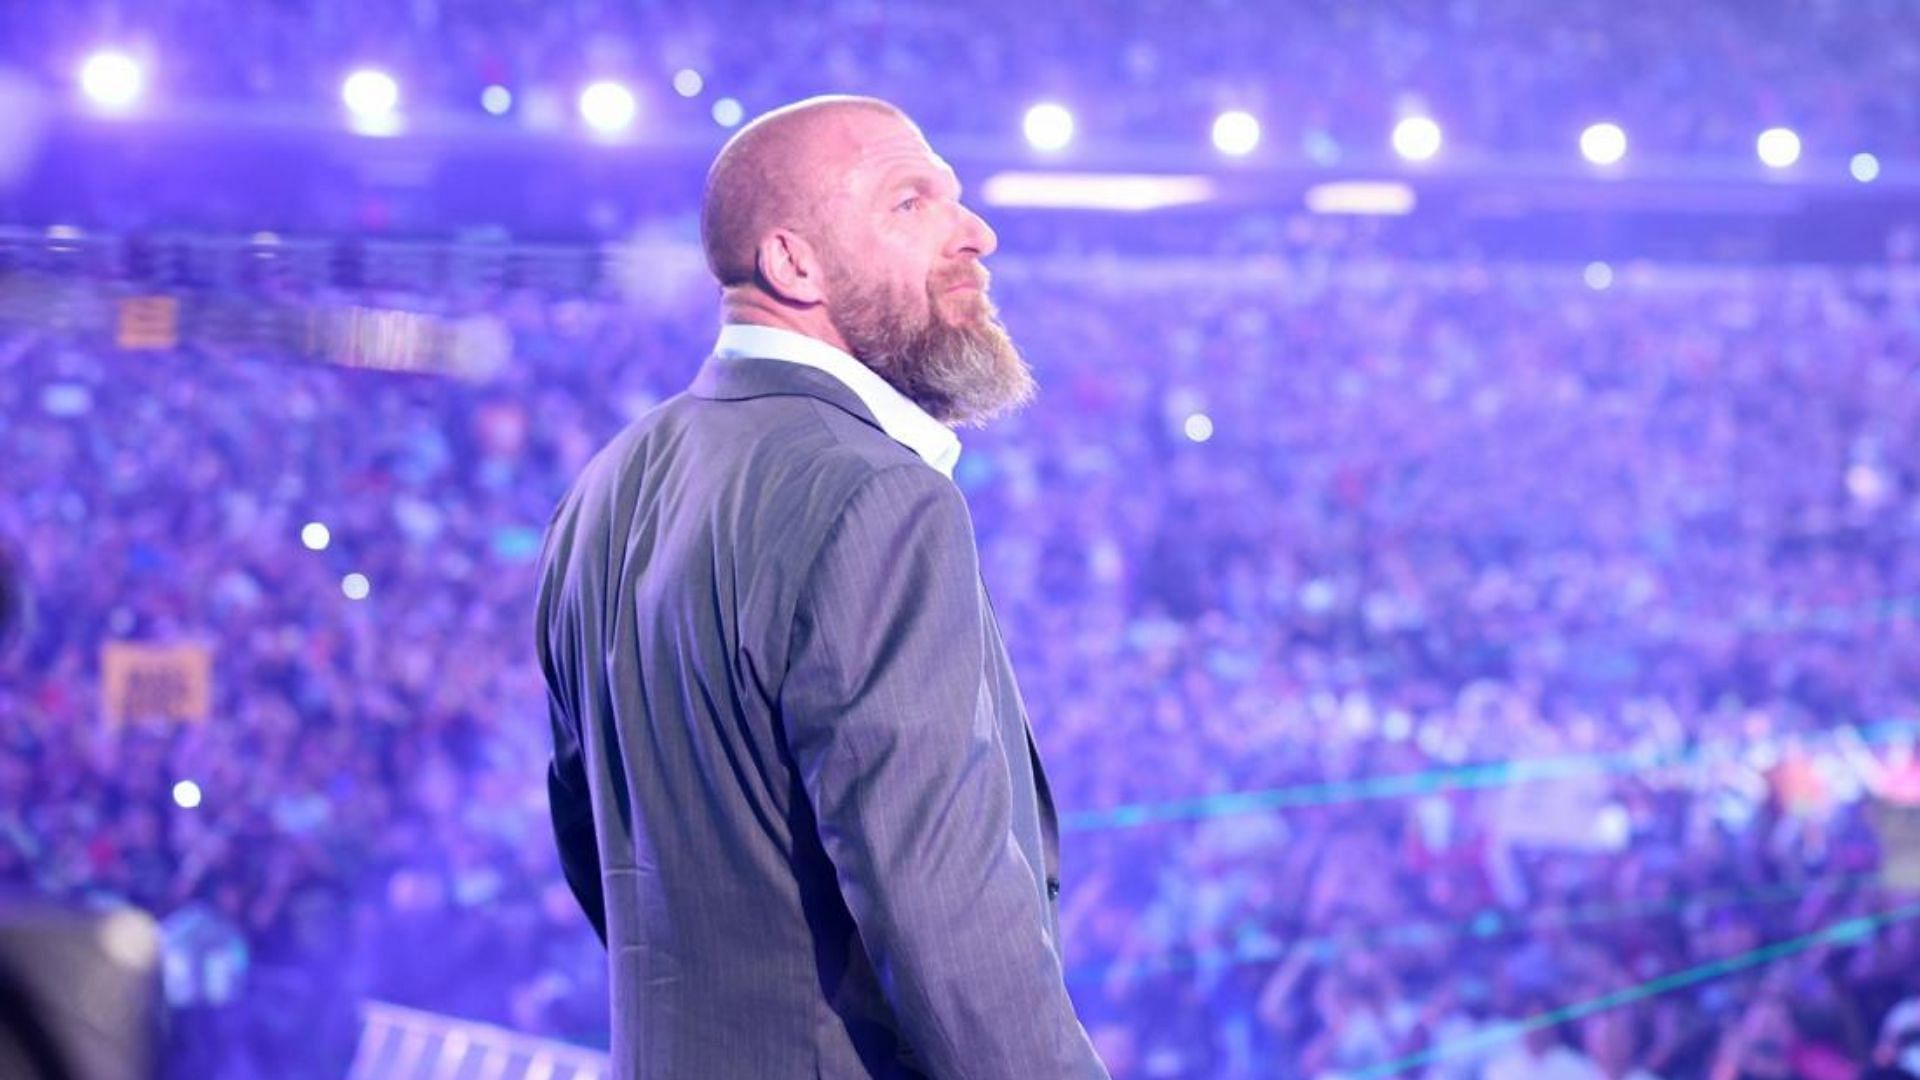 Triple H is now in charge of WWE creative